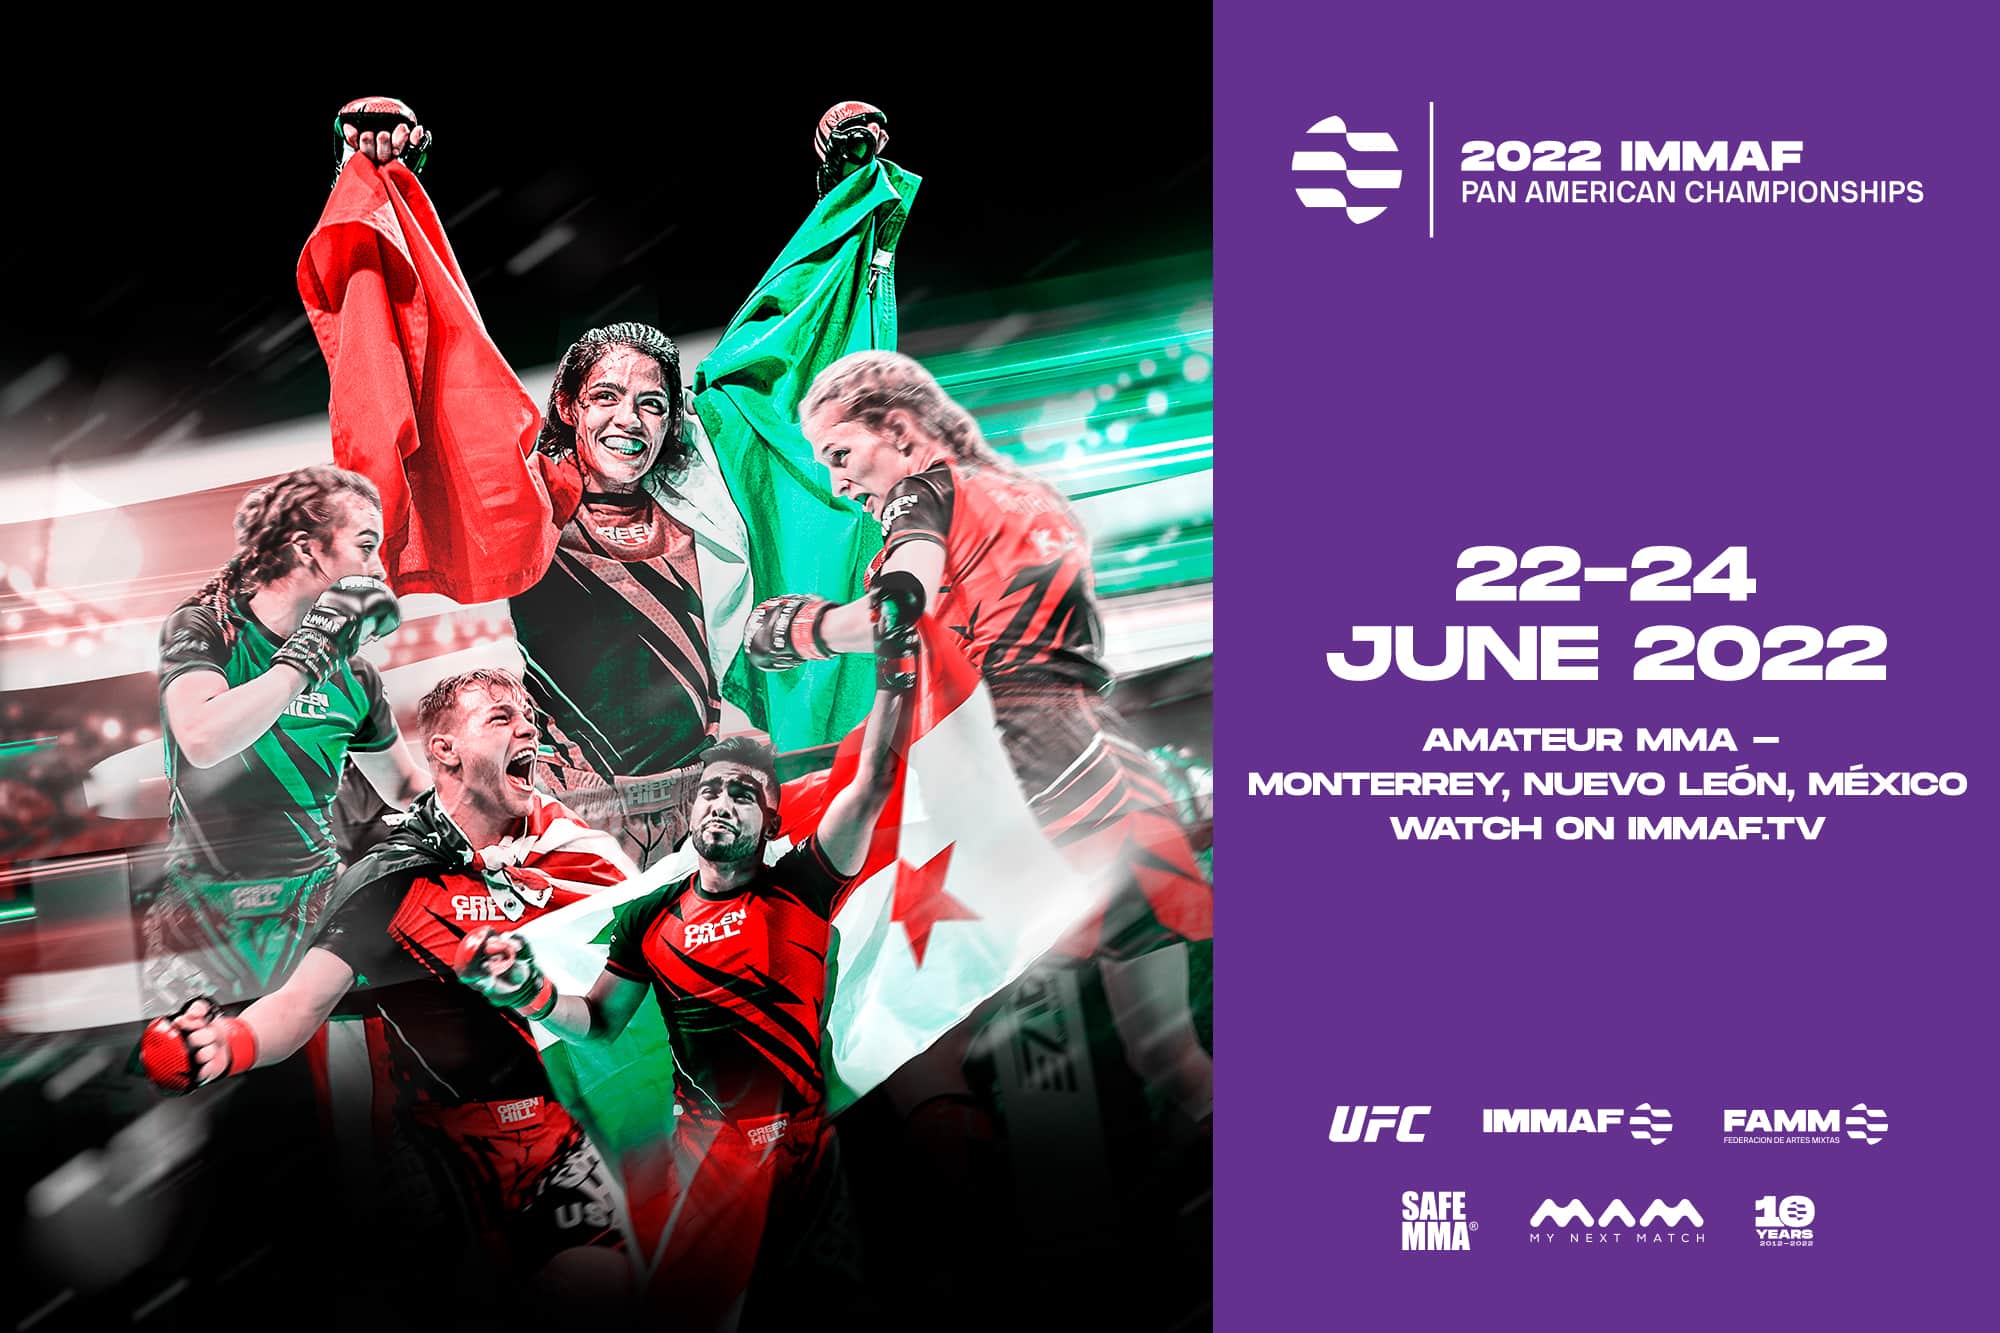 Athletes & Nations announced for IMMAF Pan Ams